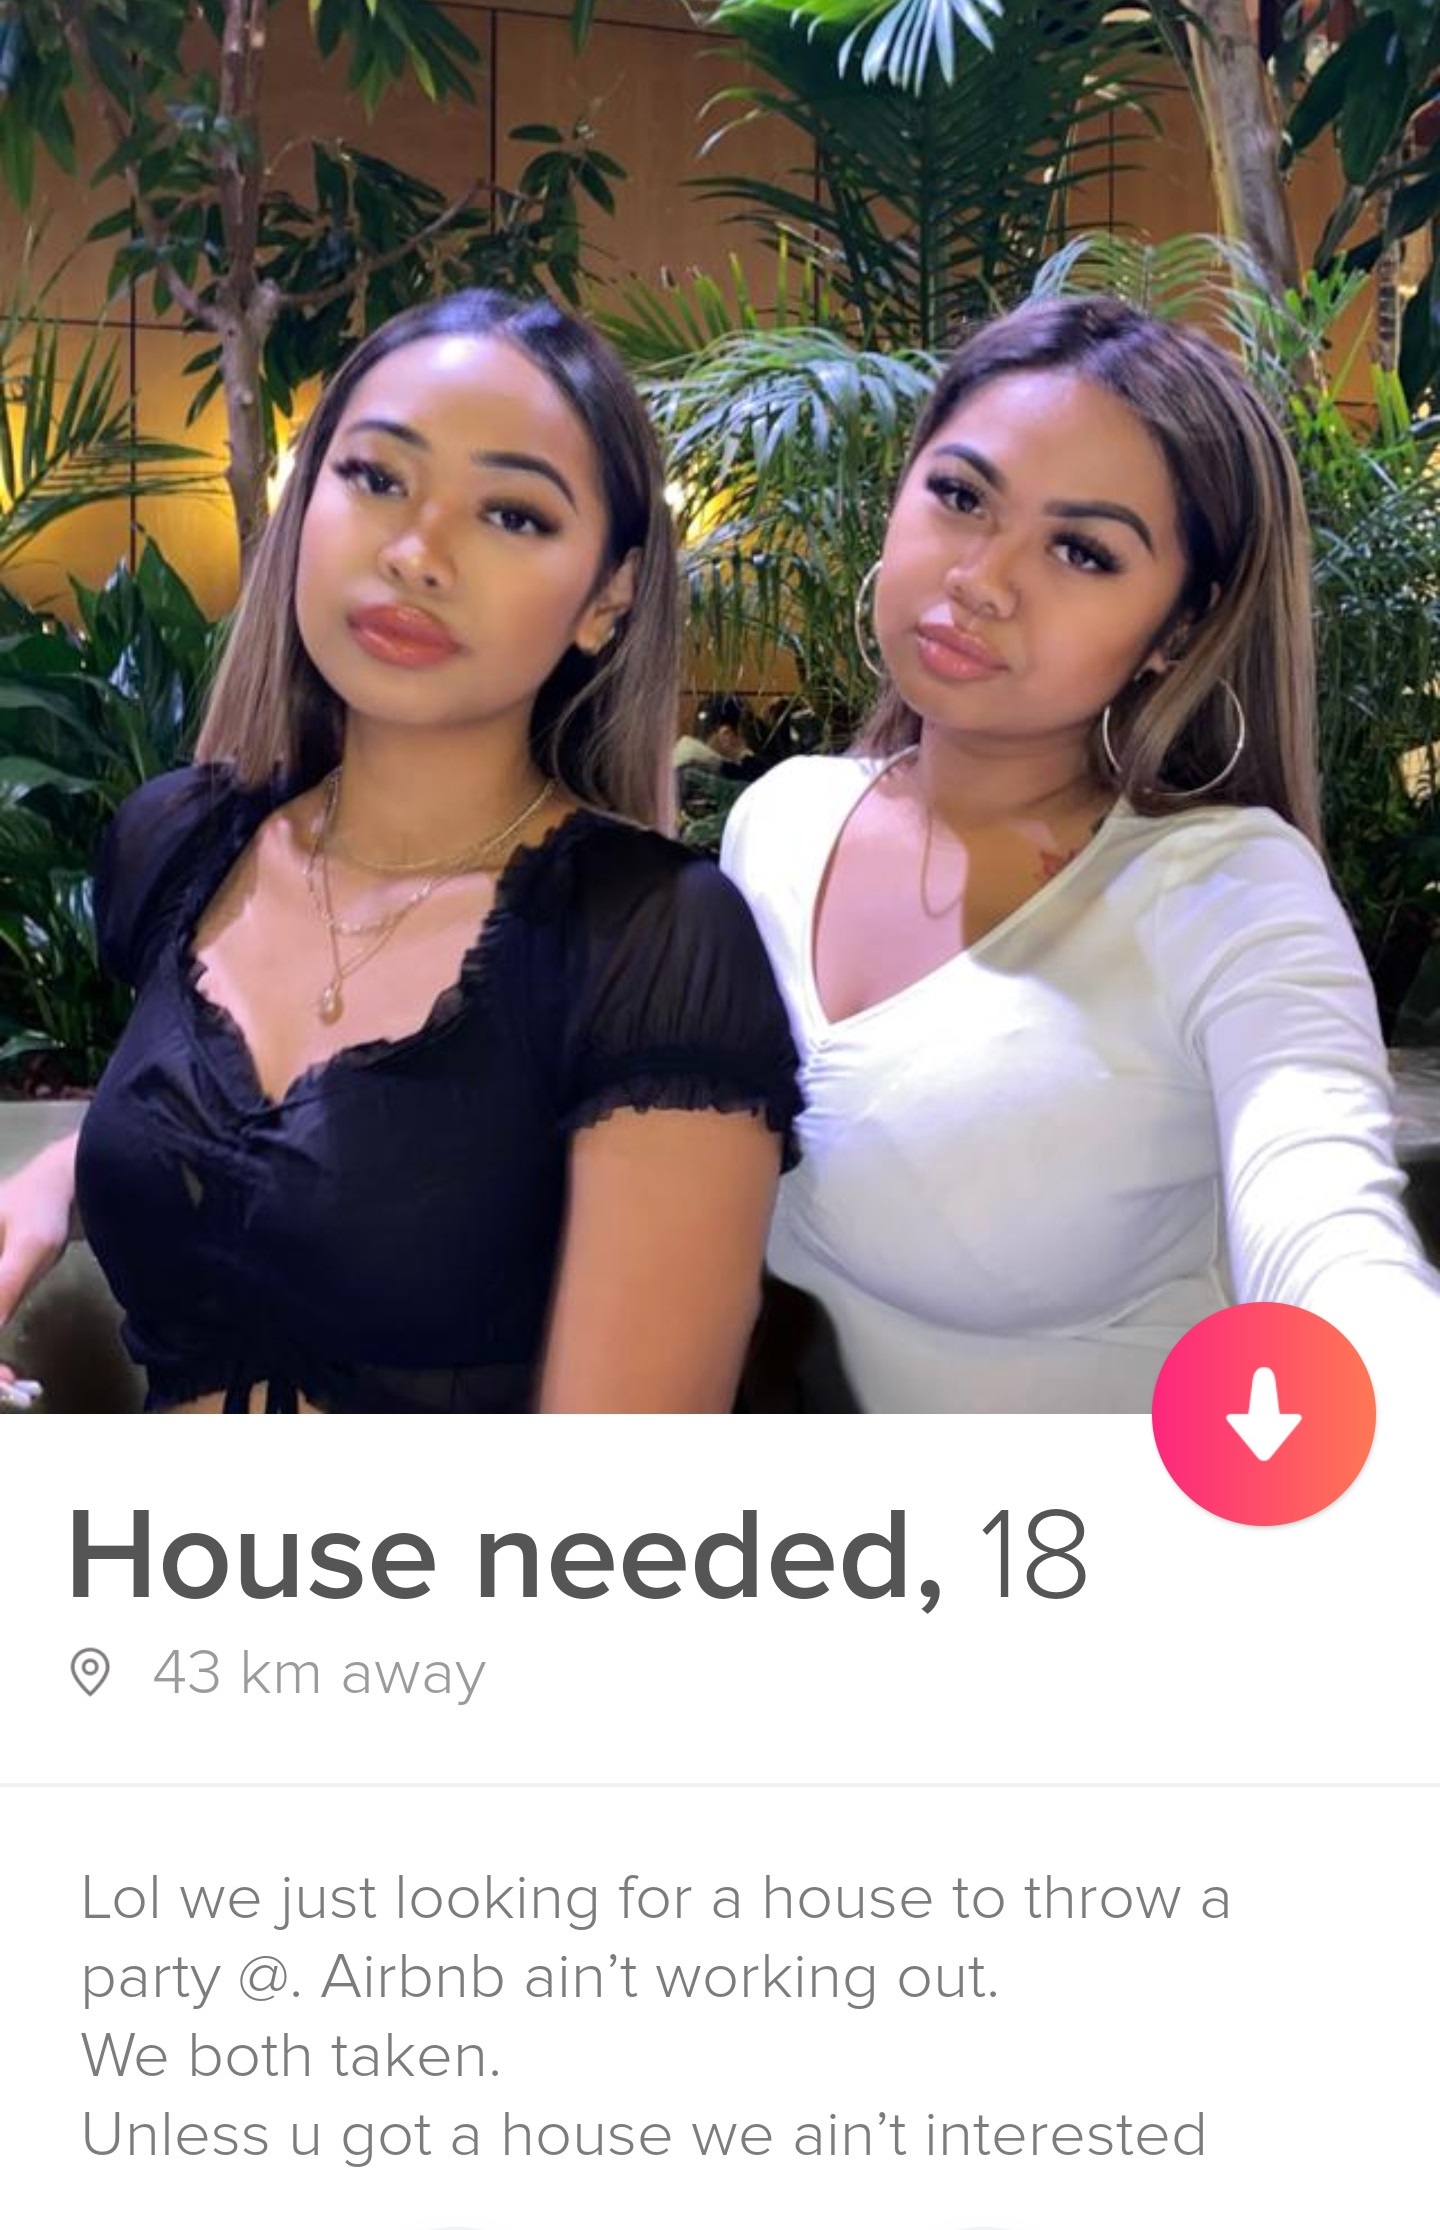 beauty - House needed, 18 43 km away Lol we just looking for a house to throw a party @ Airbnb ain't working out We both taken. Unless u got a house we ain't interested